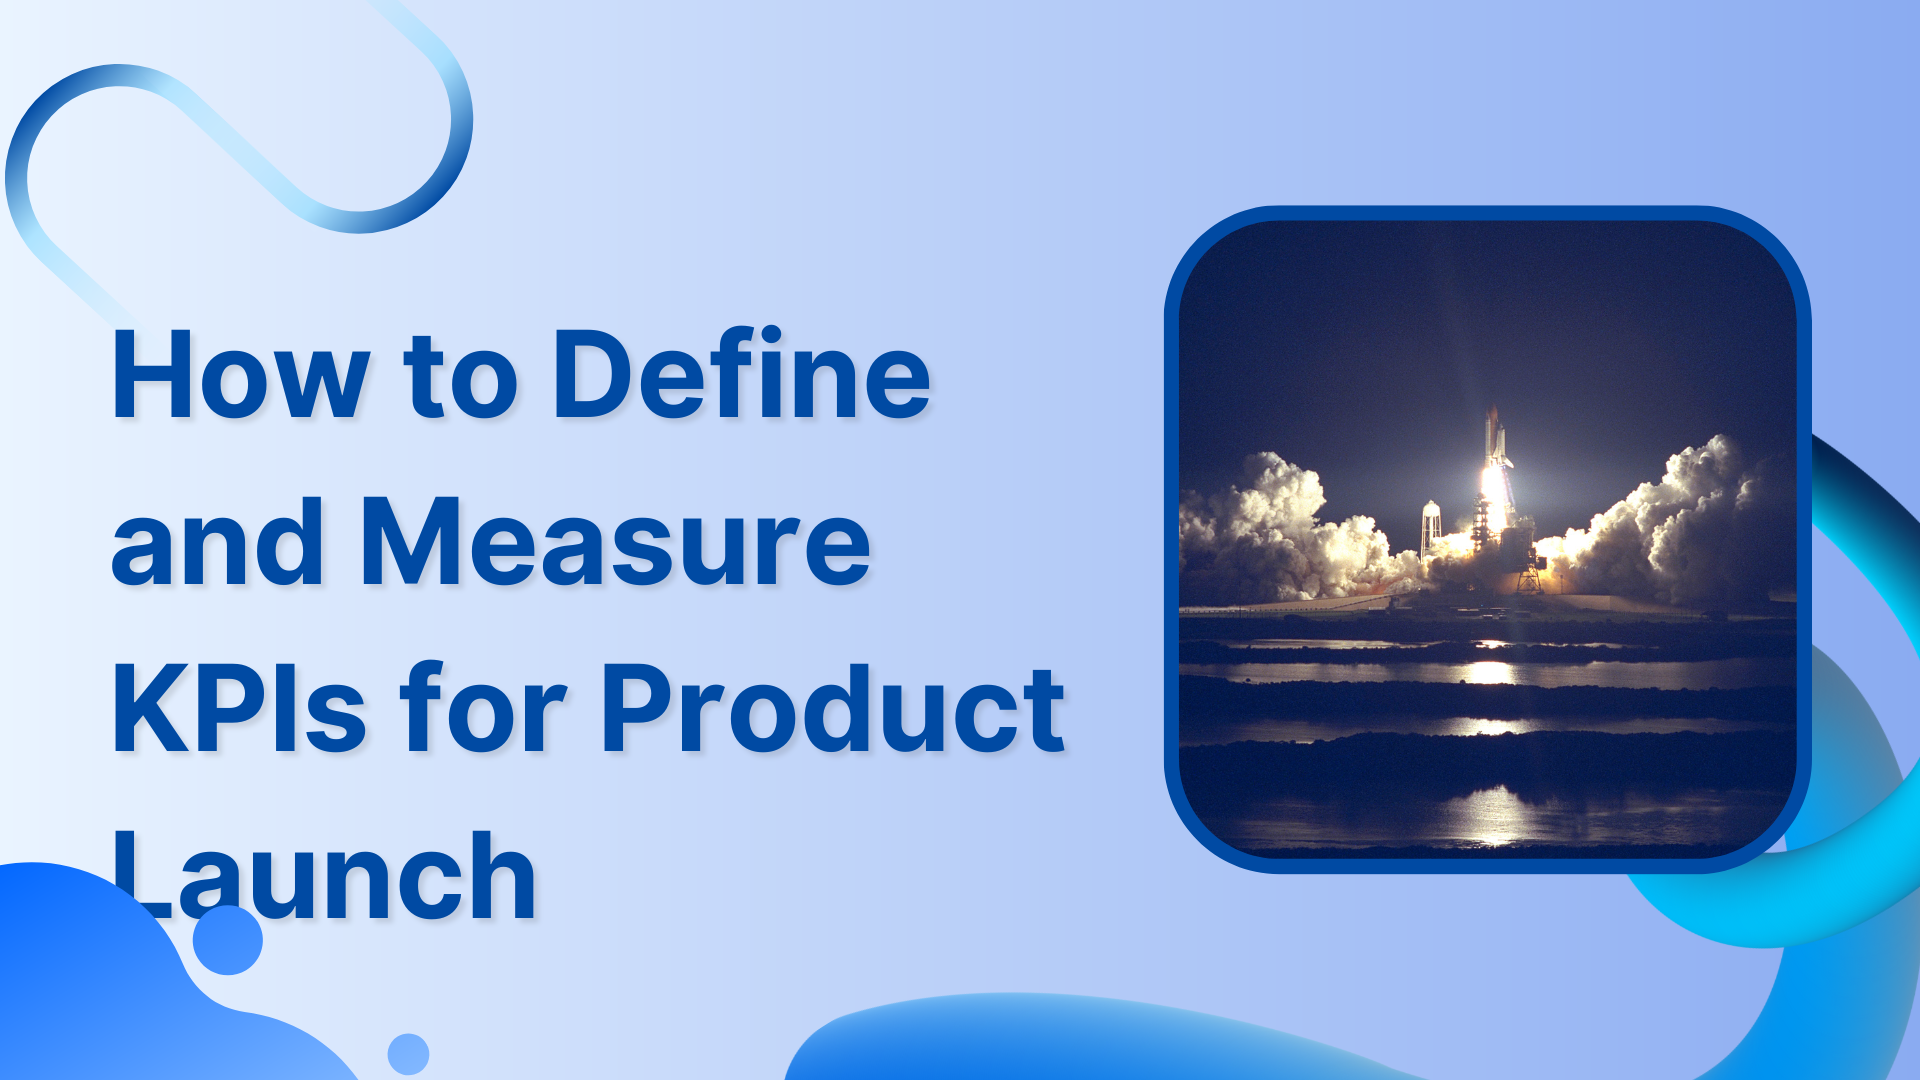 How to Define and Measure KPIs for Product Launch